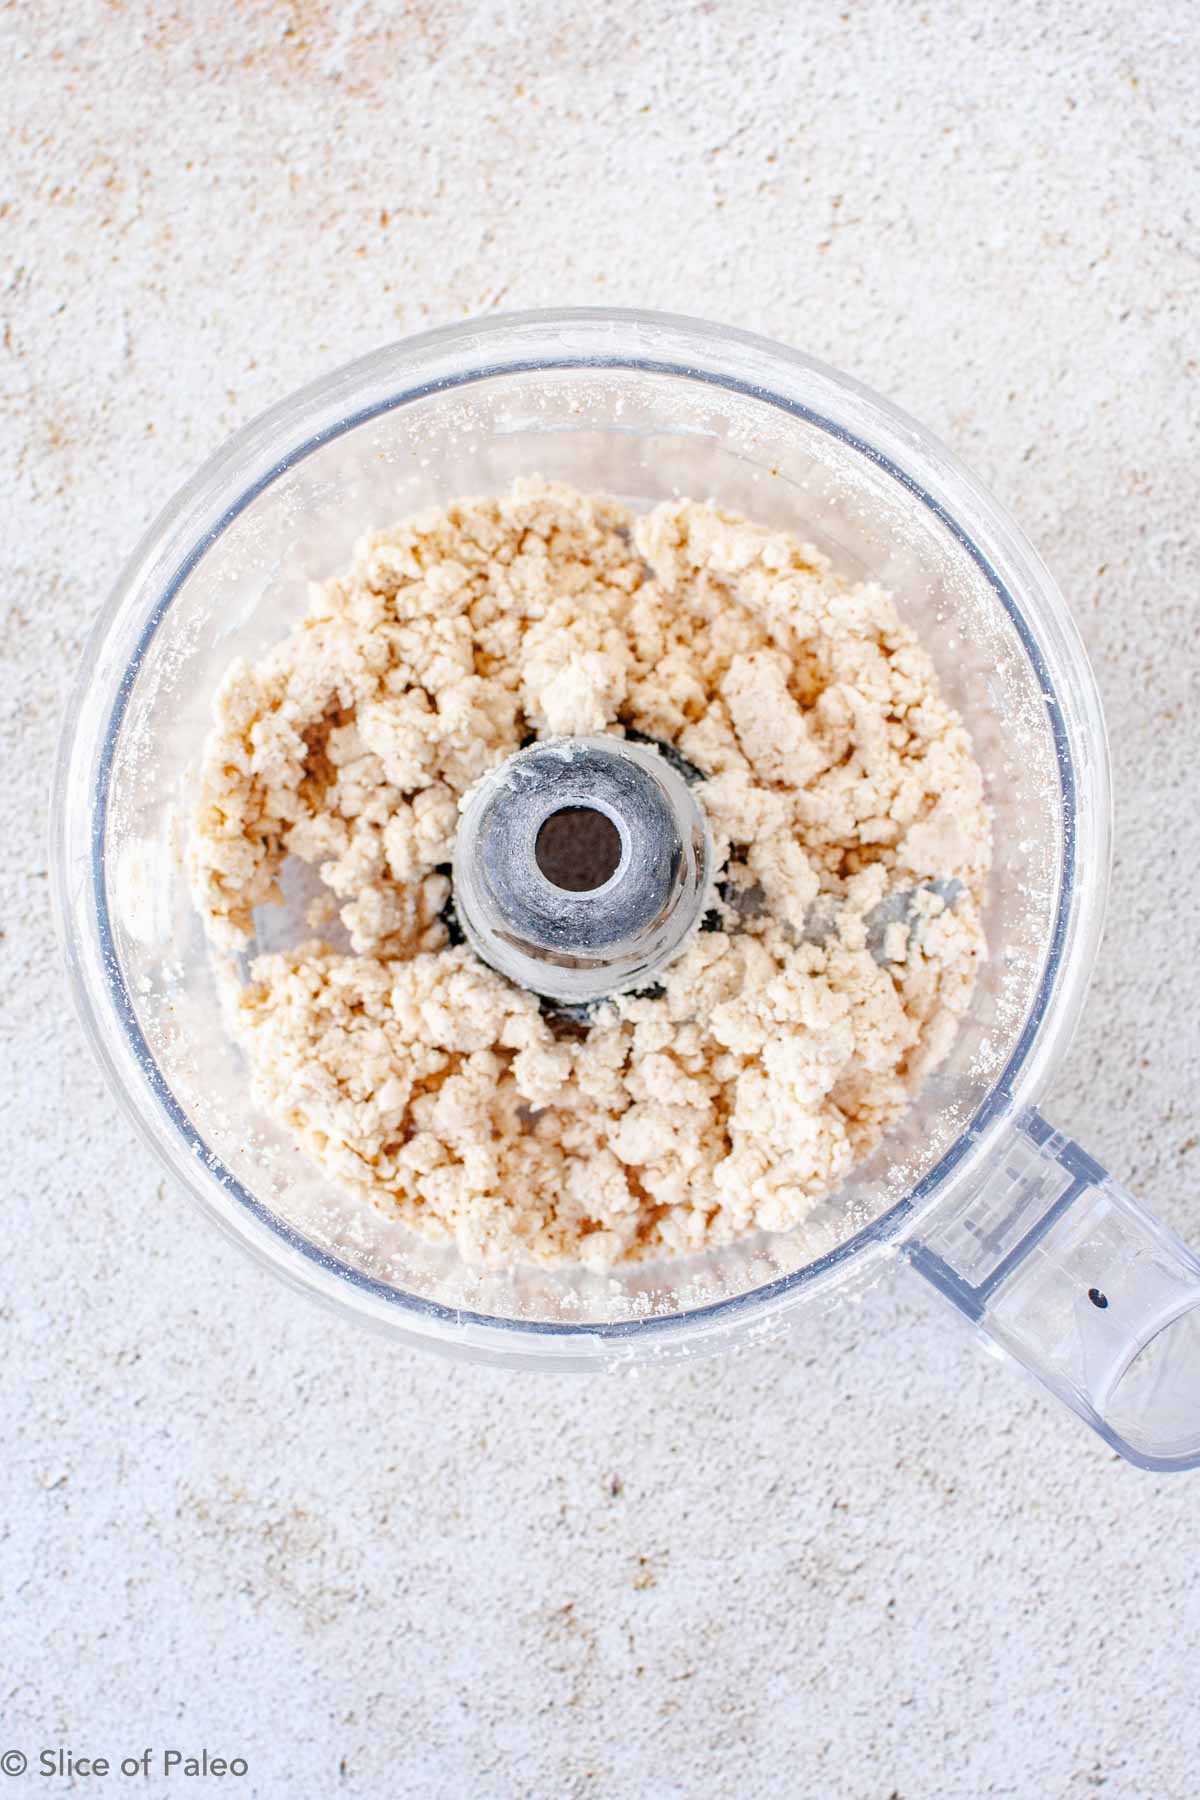 Paleo pie crust flour and shortening in a food processor